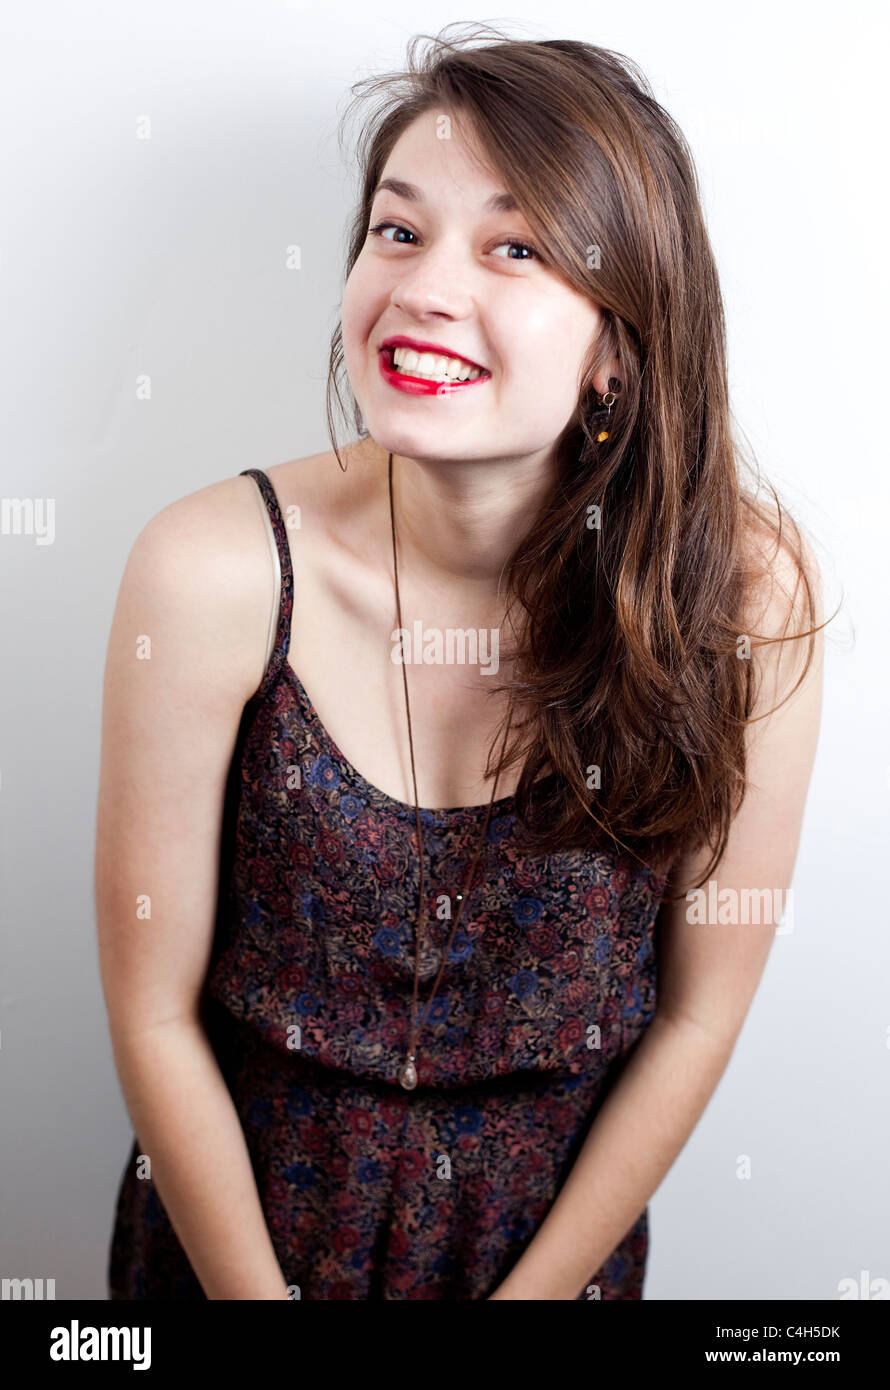 Portrait of a teenager with a cheeky smile on her face, London, England, UK Stock Photo